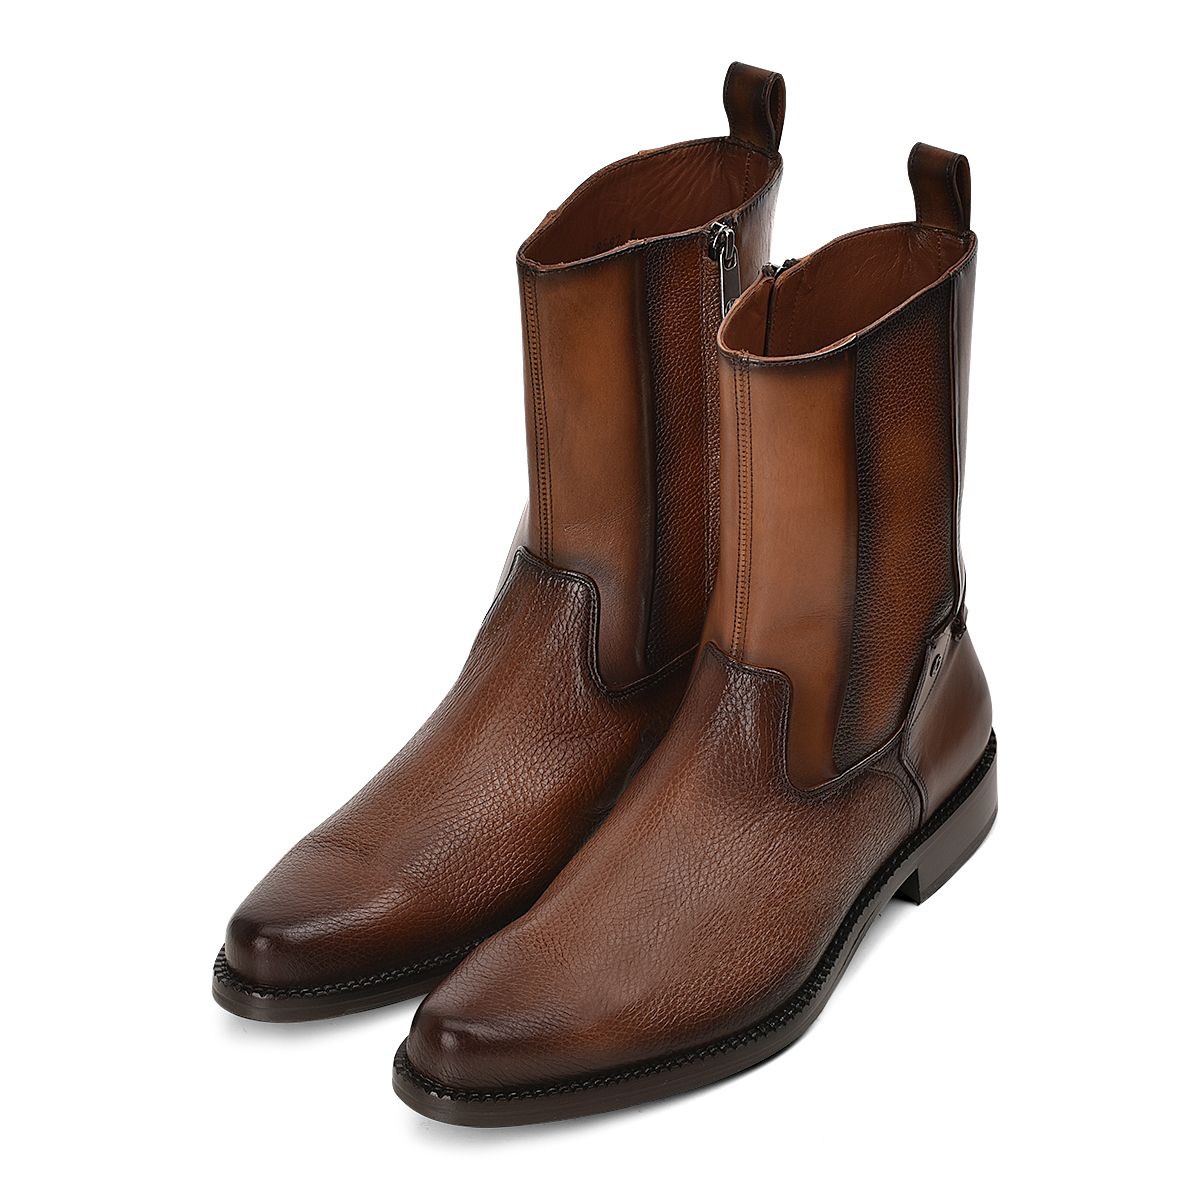 828VNTV - Franco Cuadra brown dress casual leather zip ankle boots for men-Kuet.us